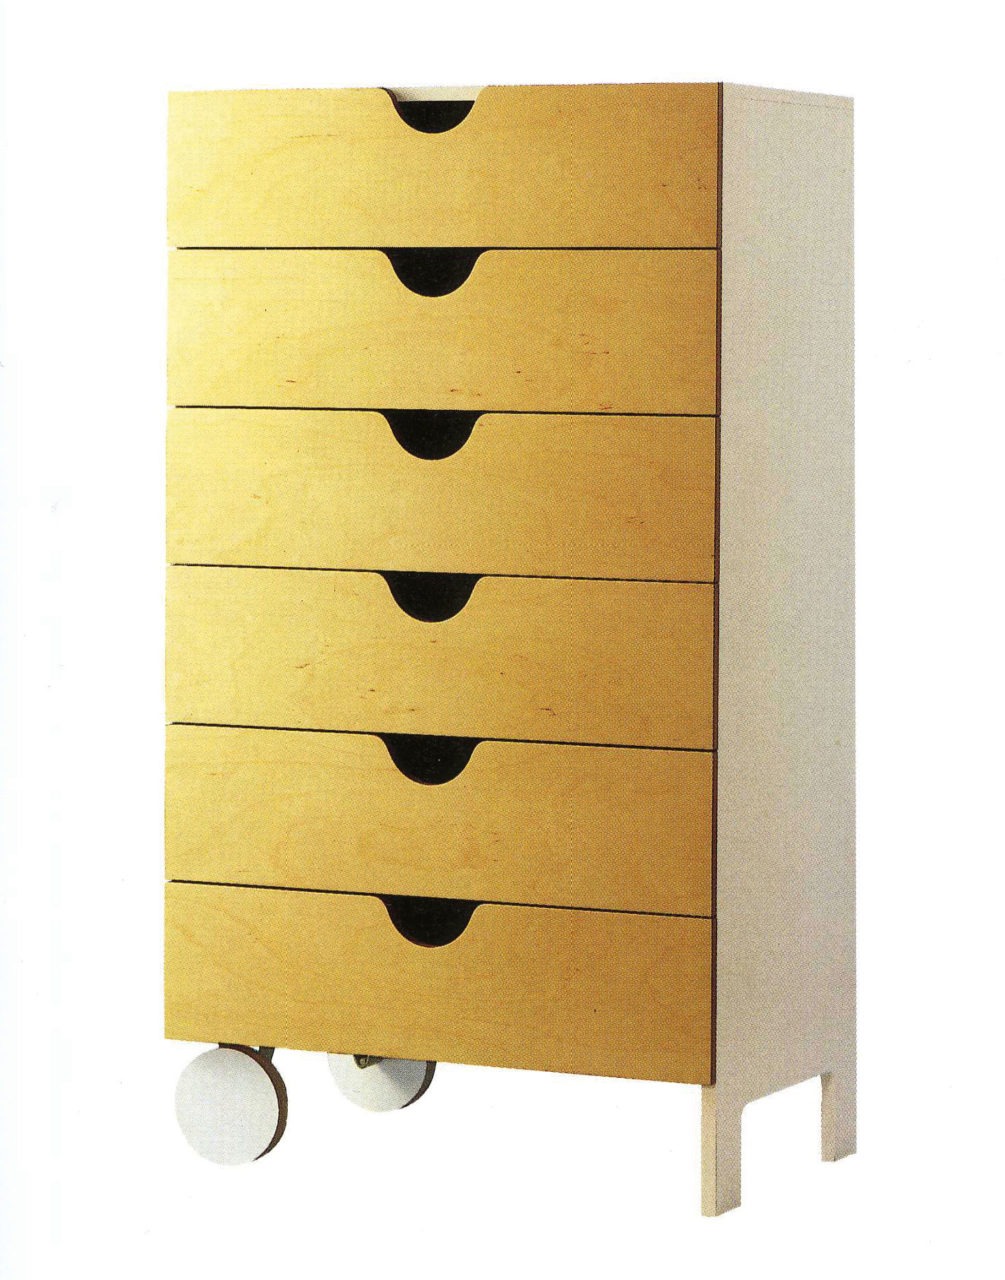 IKEA PS chest of drawers 1995.